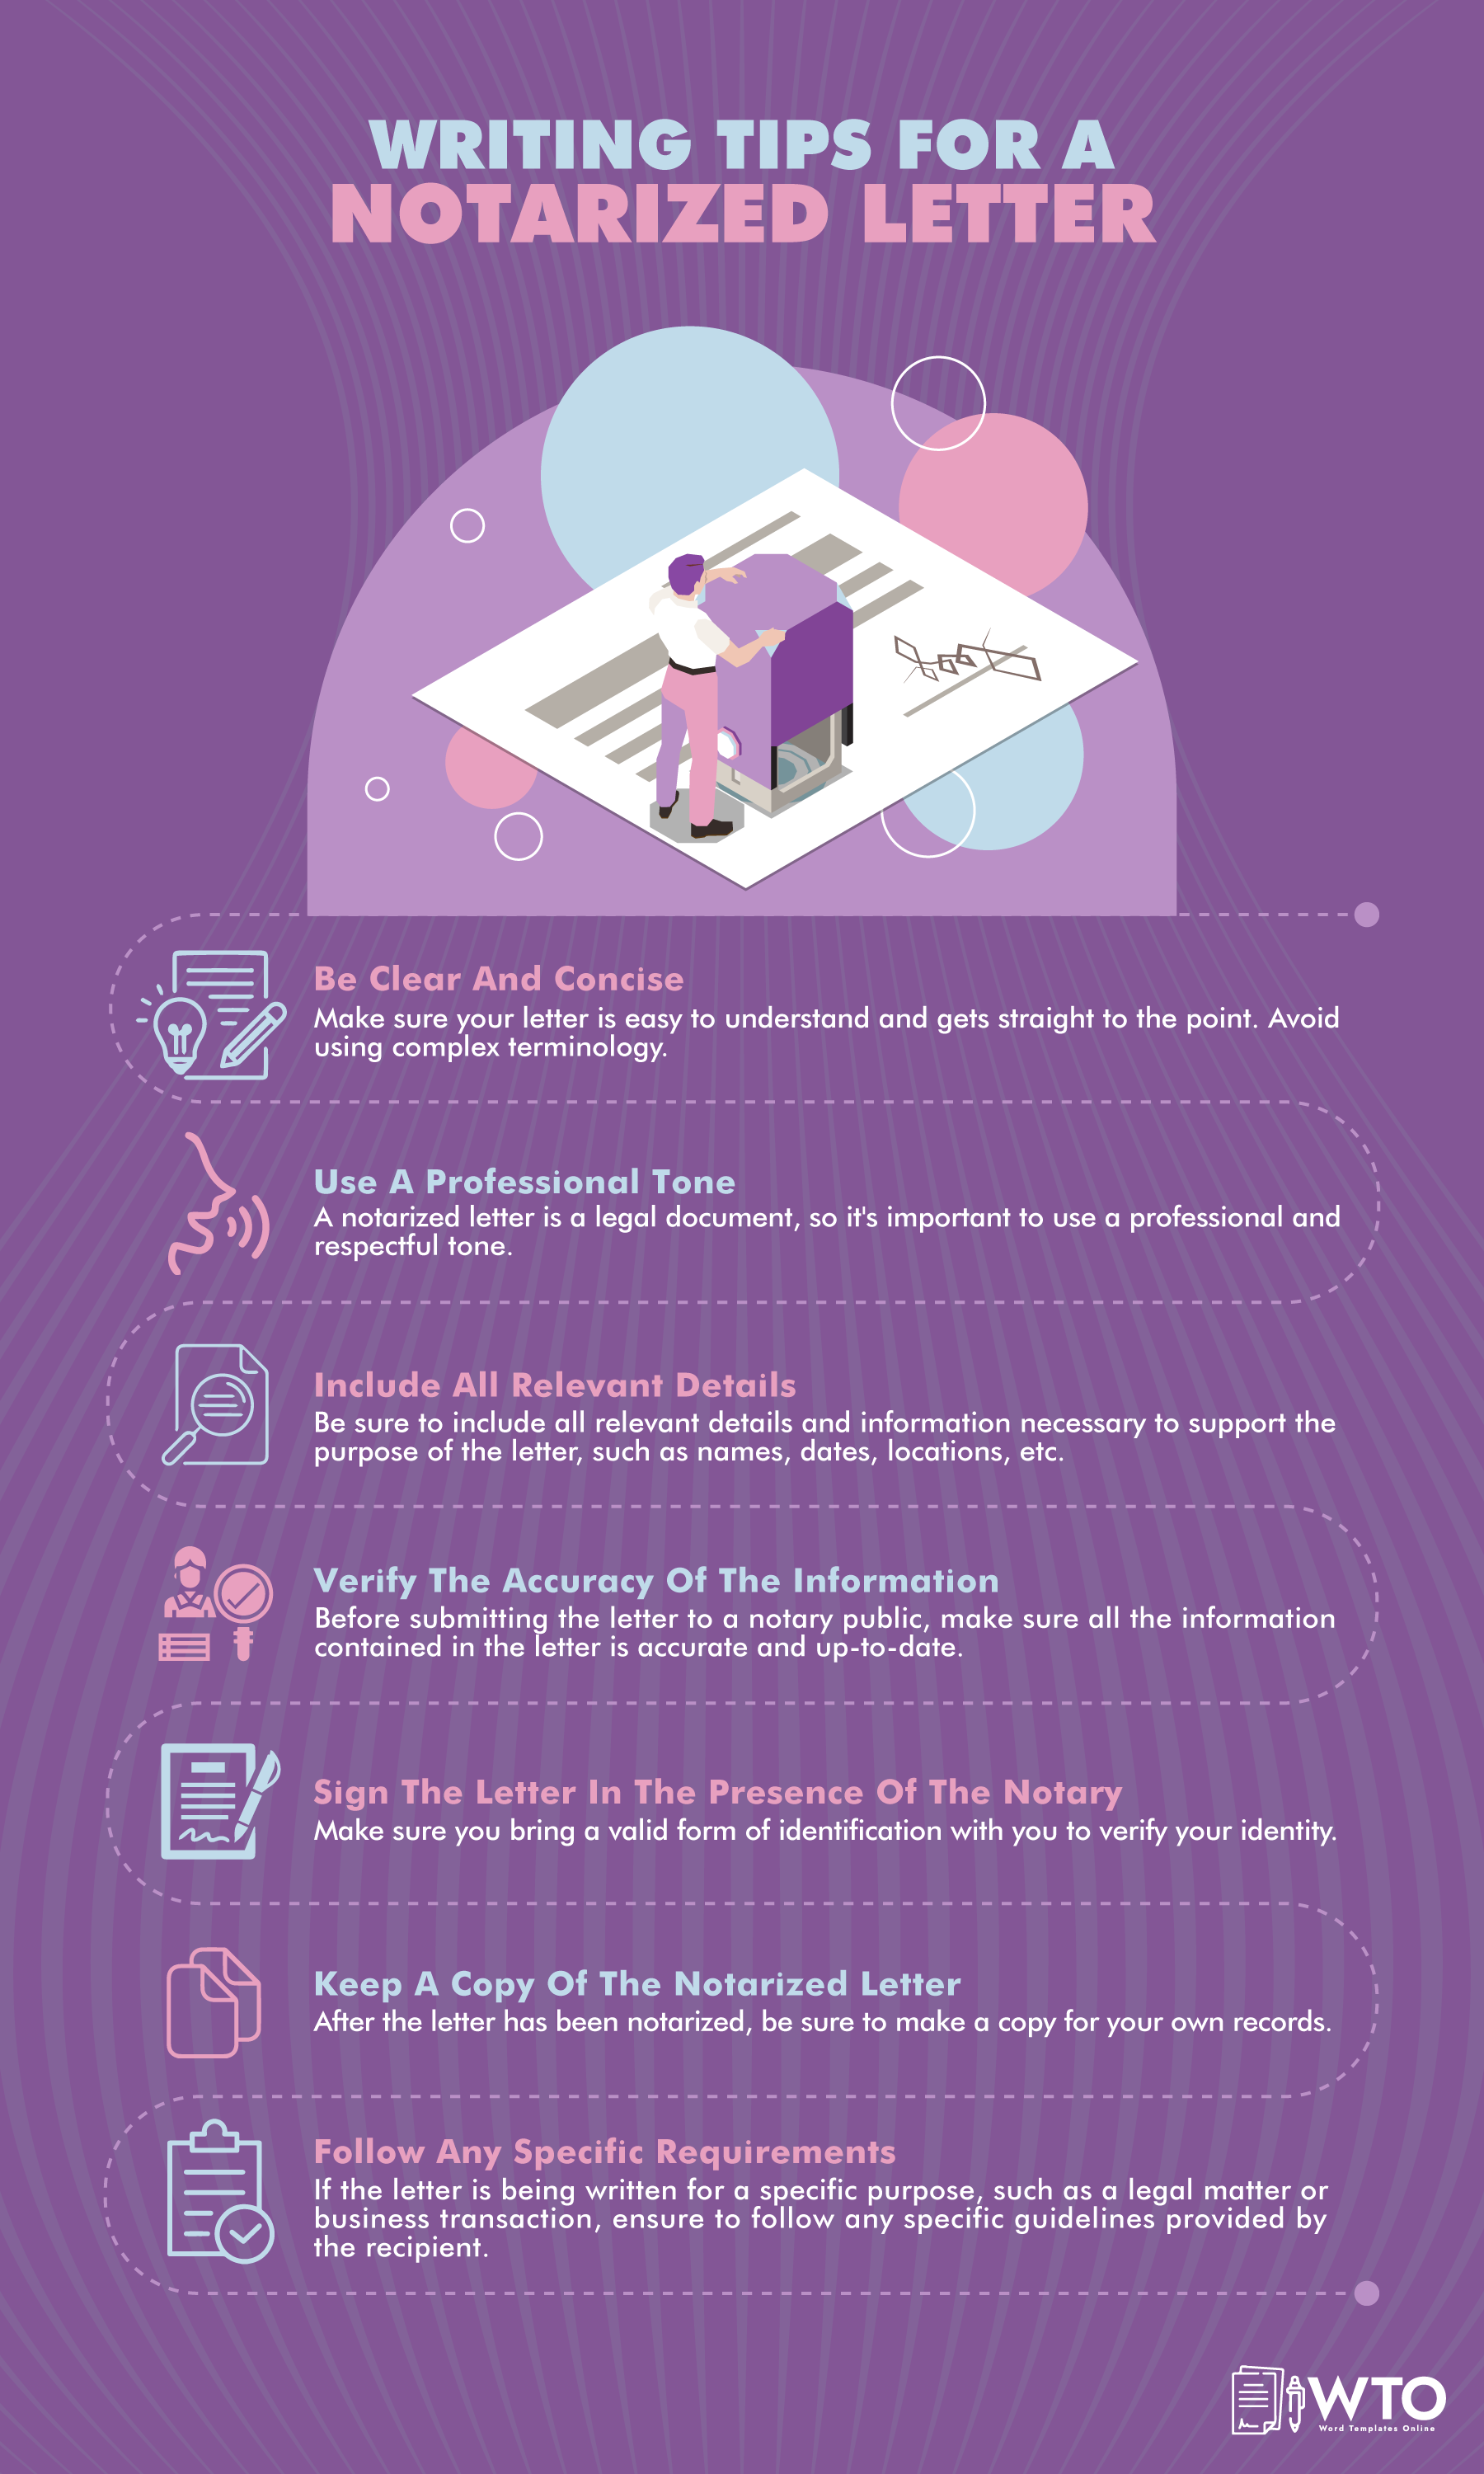 This infographic is about the writing tips for a notarized letter.